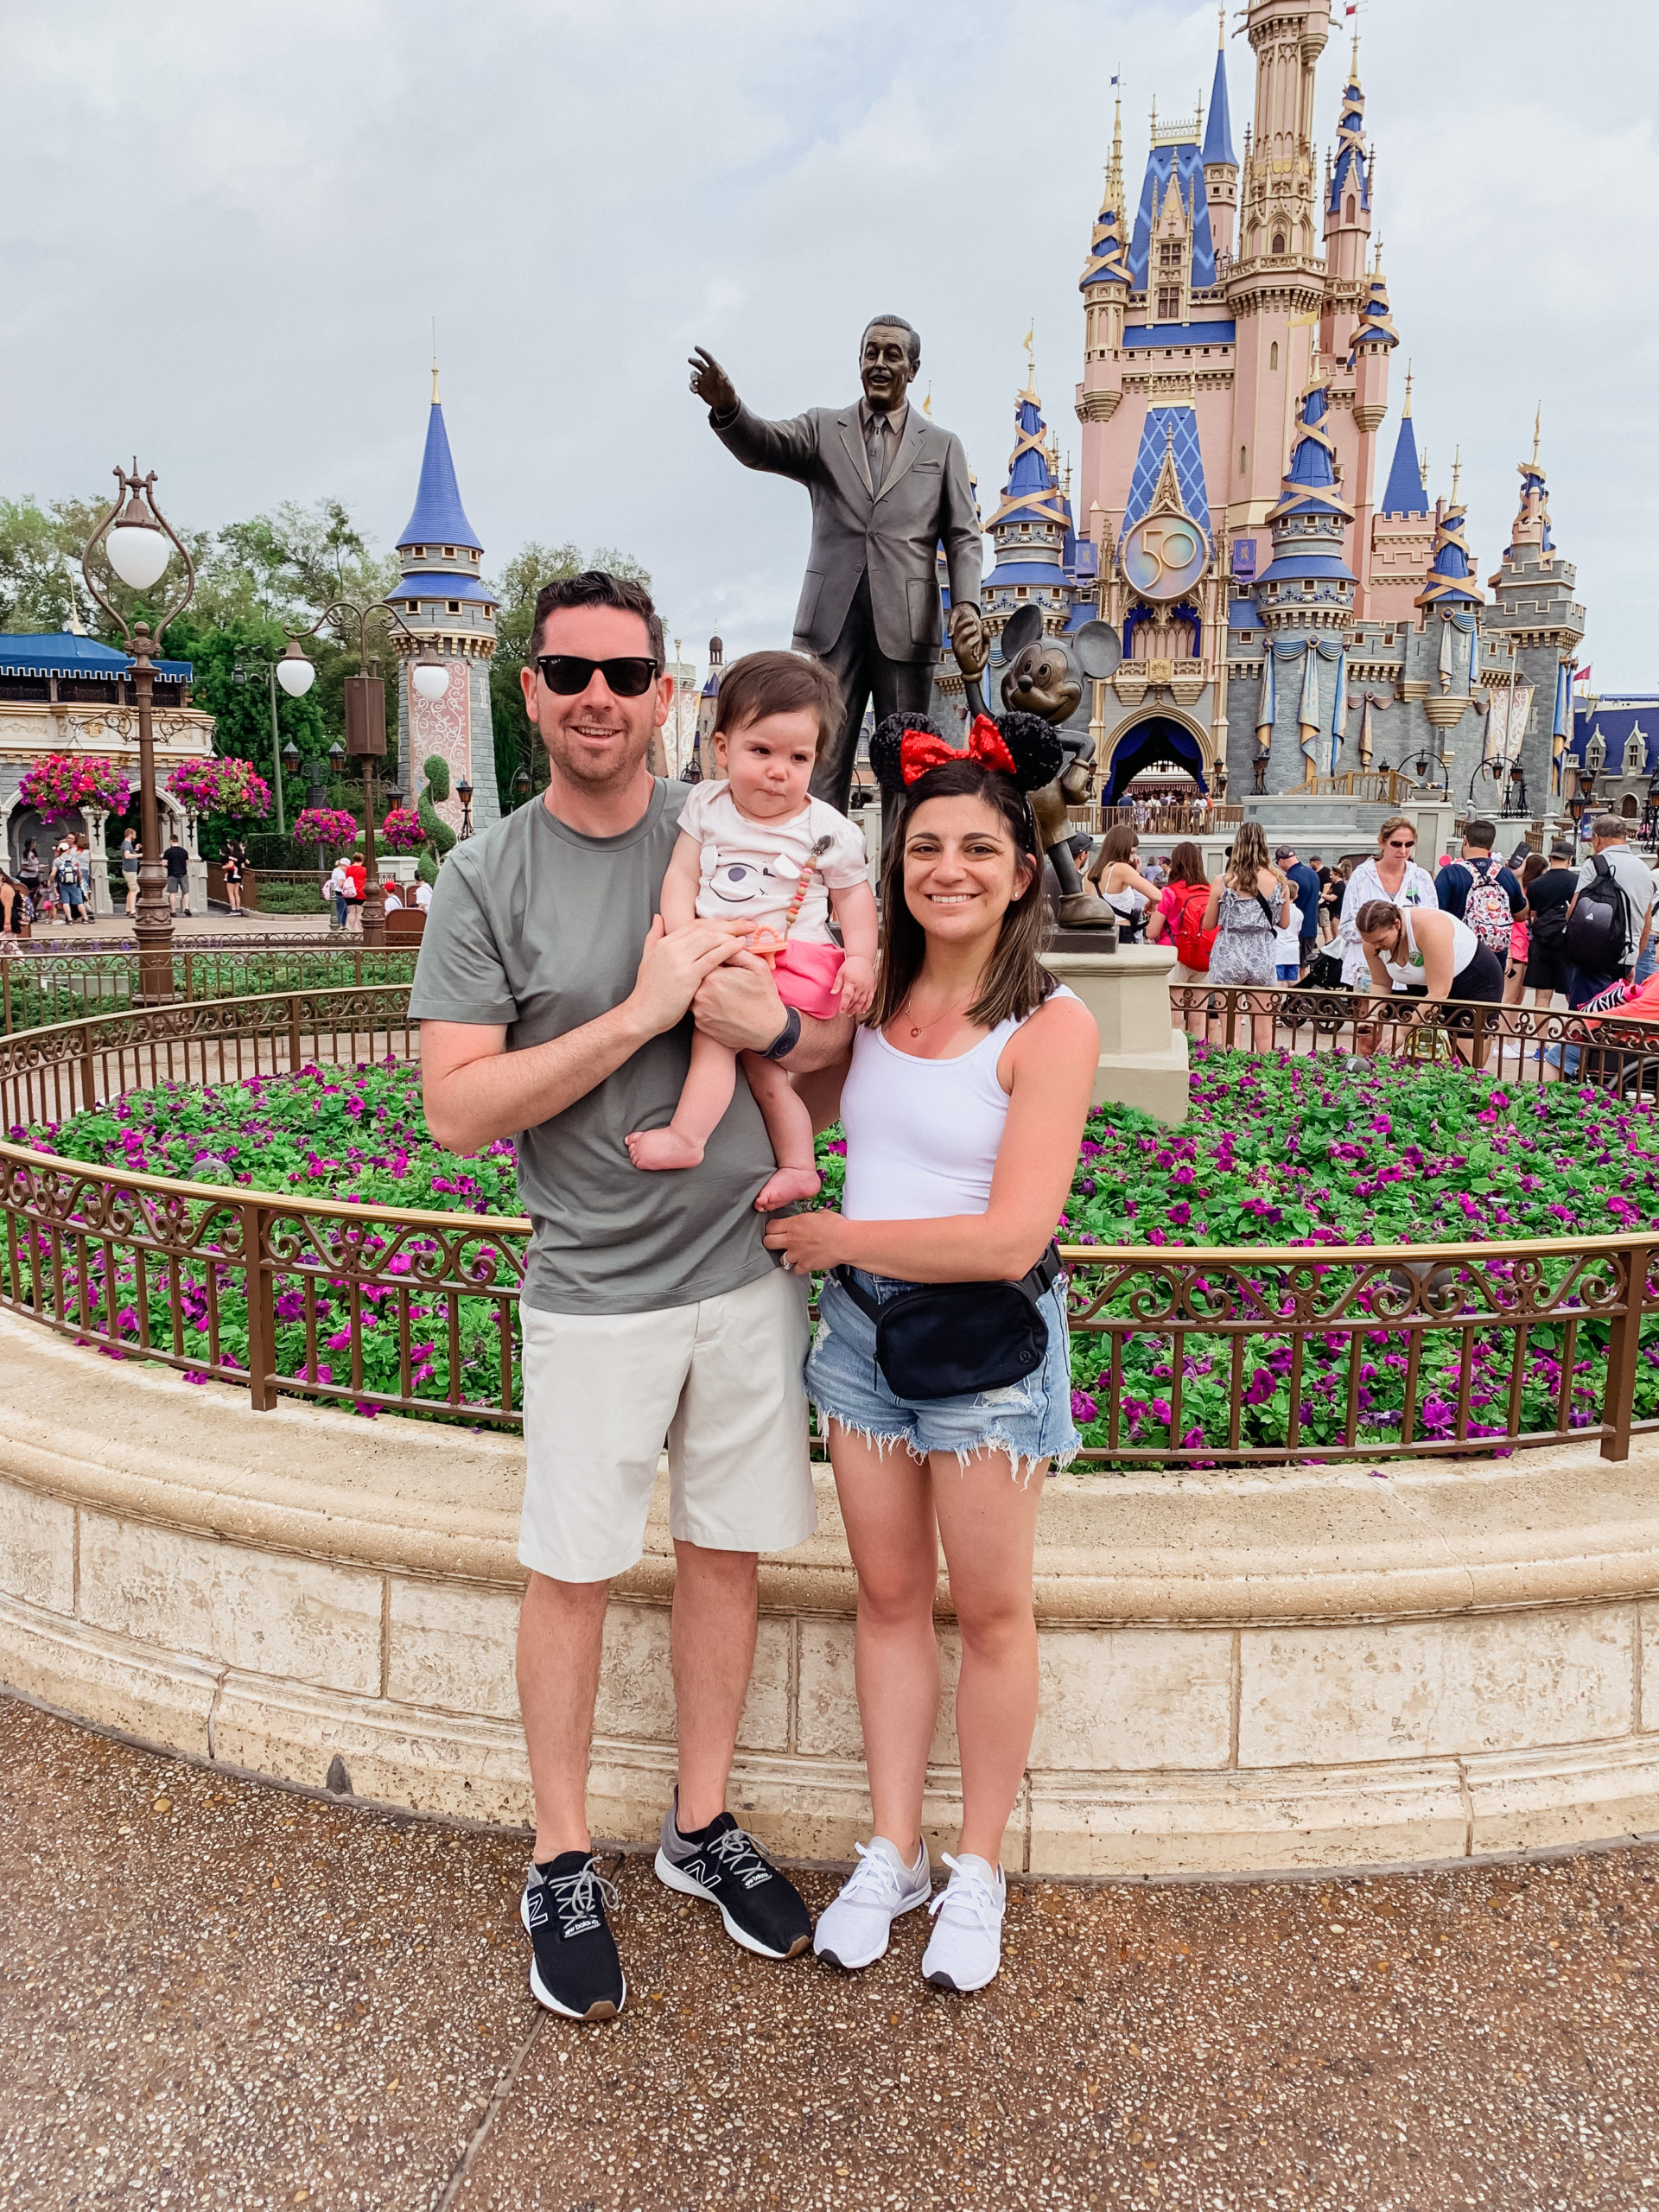 Outfit Ideas For Disney World, Travel